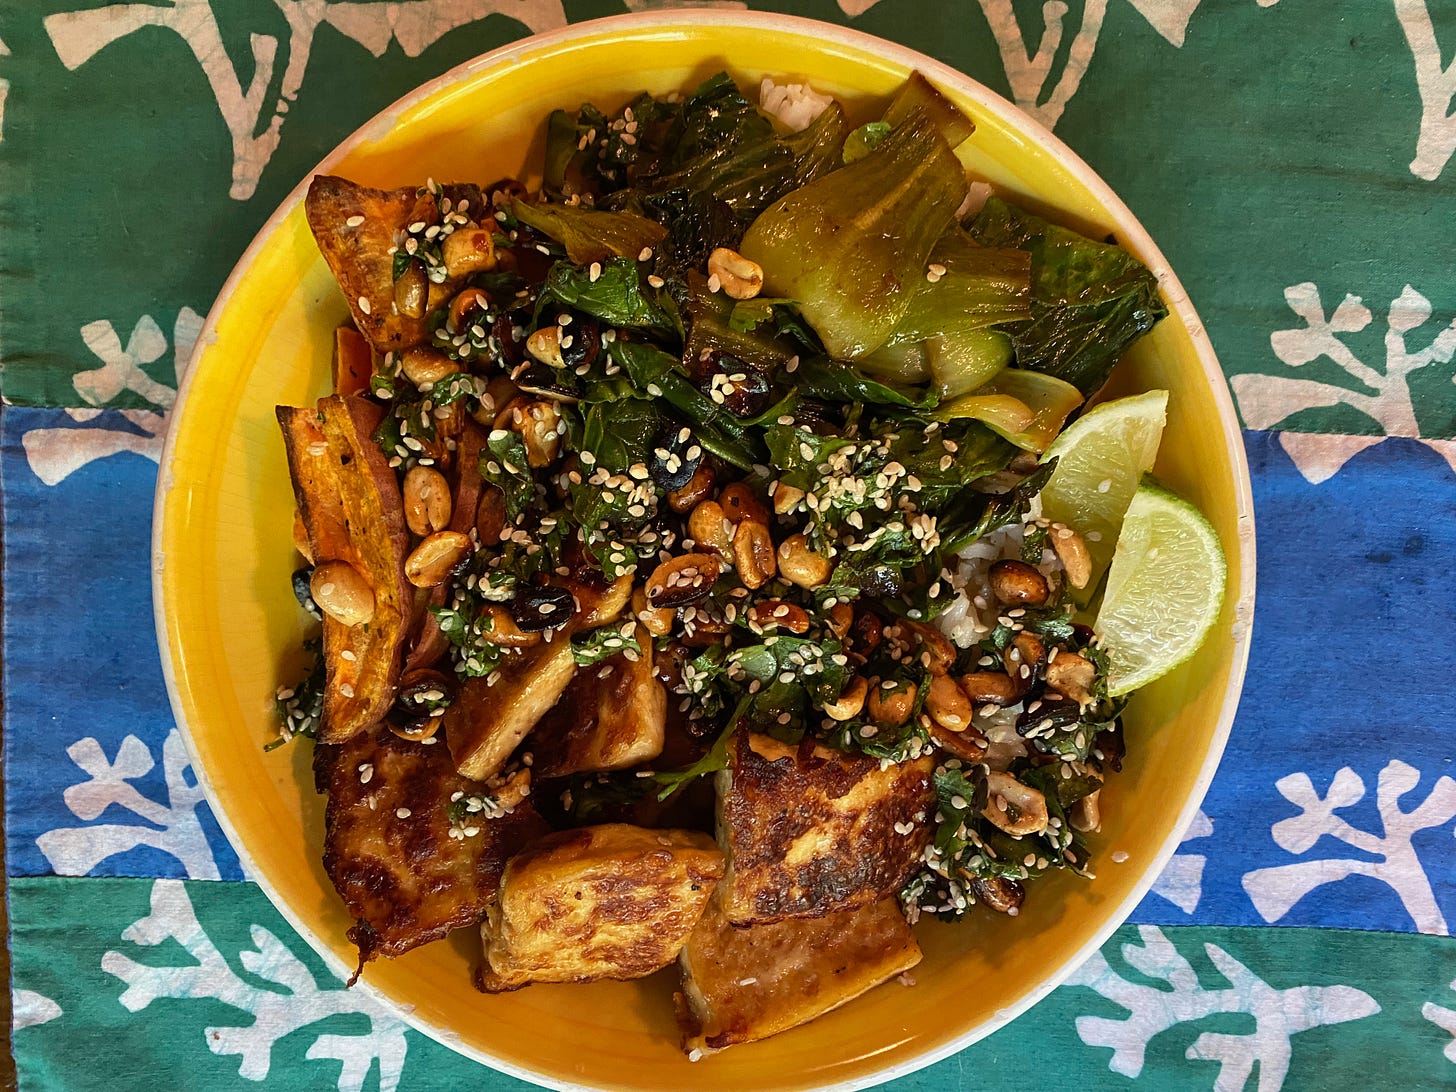 A wide yellow ceramic bowl holding sweet potato wedges, crispy brown tofu squares, sautéed bok choy, and lime wedges, with peanuts and sesame seeds scattered on top.